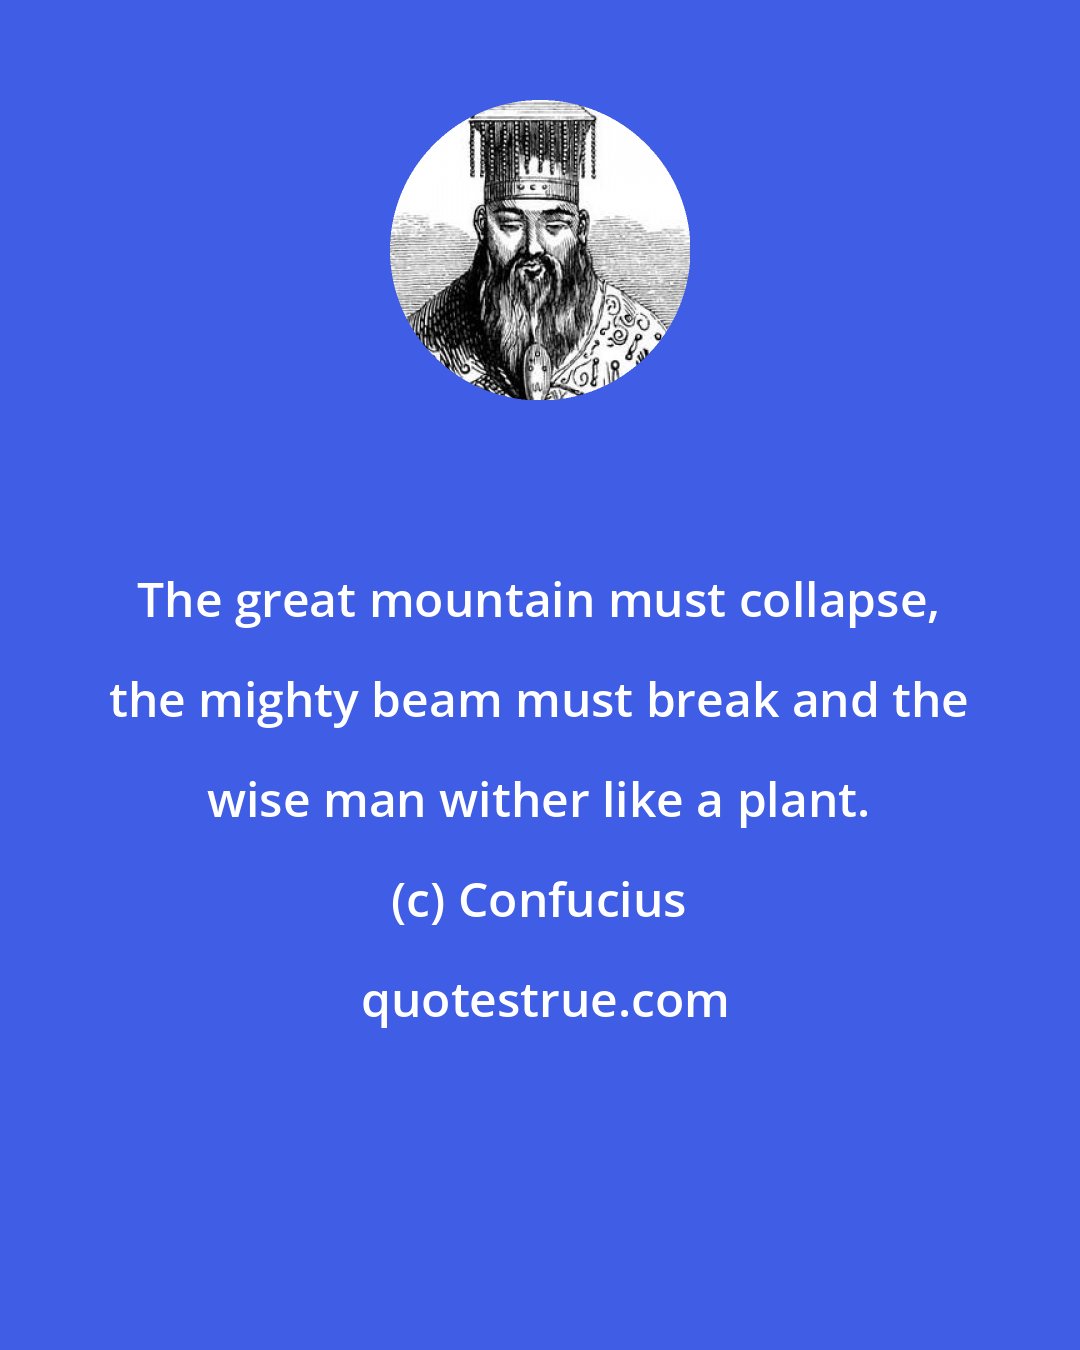 Confucius: The great mountain must collapse, the mighty beam must break and the wise man wither like a plant.